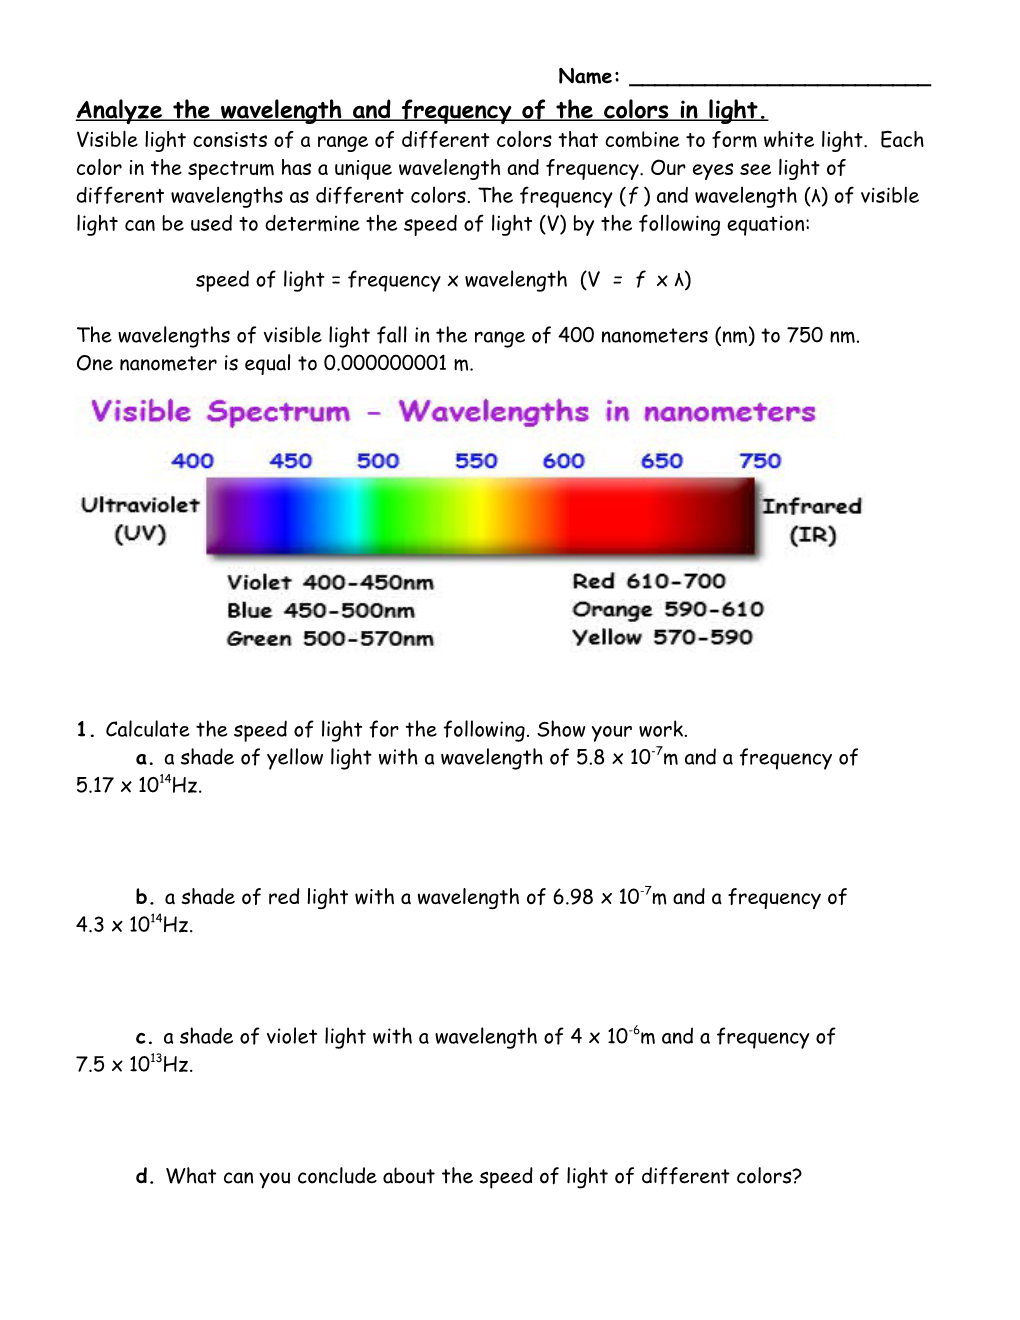 Analyze the Wavelength and Frequency of the Colors in Light